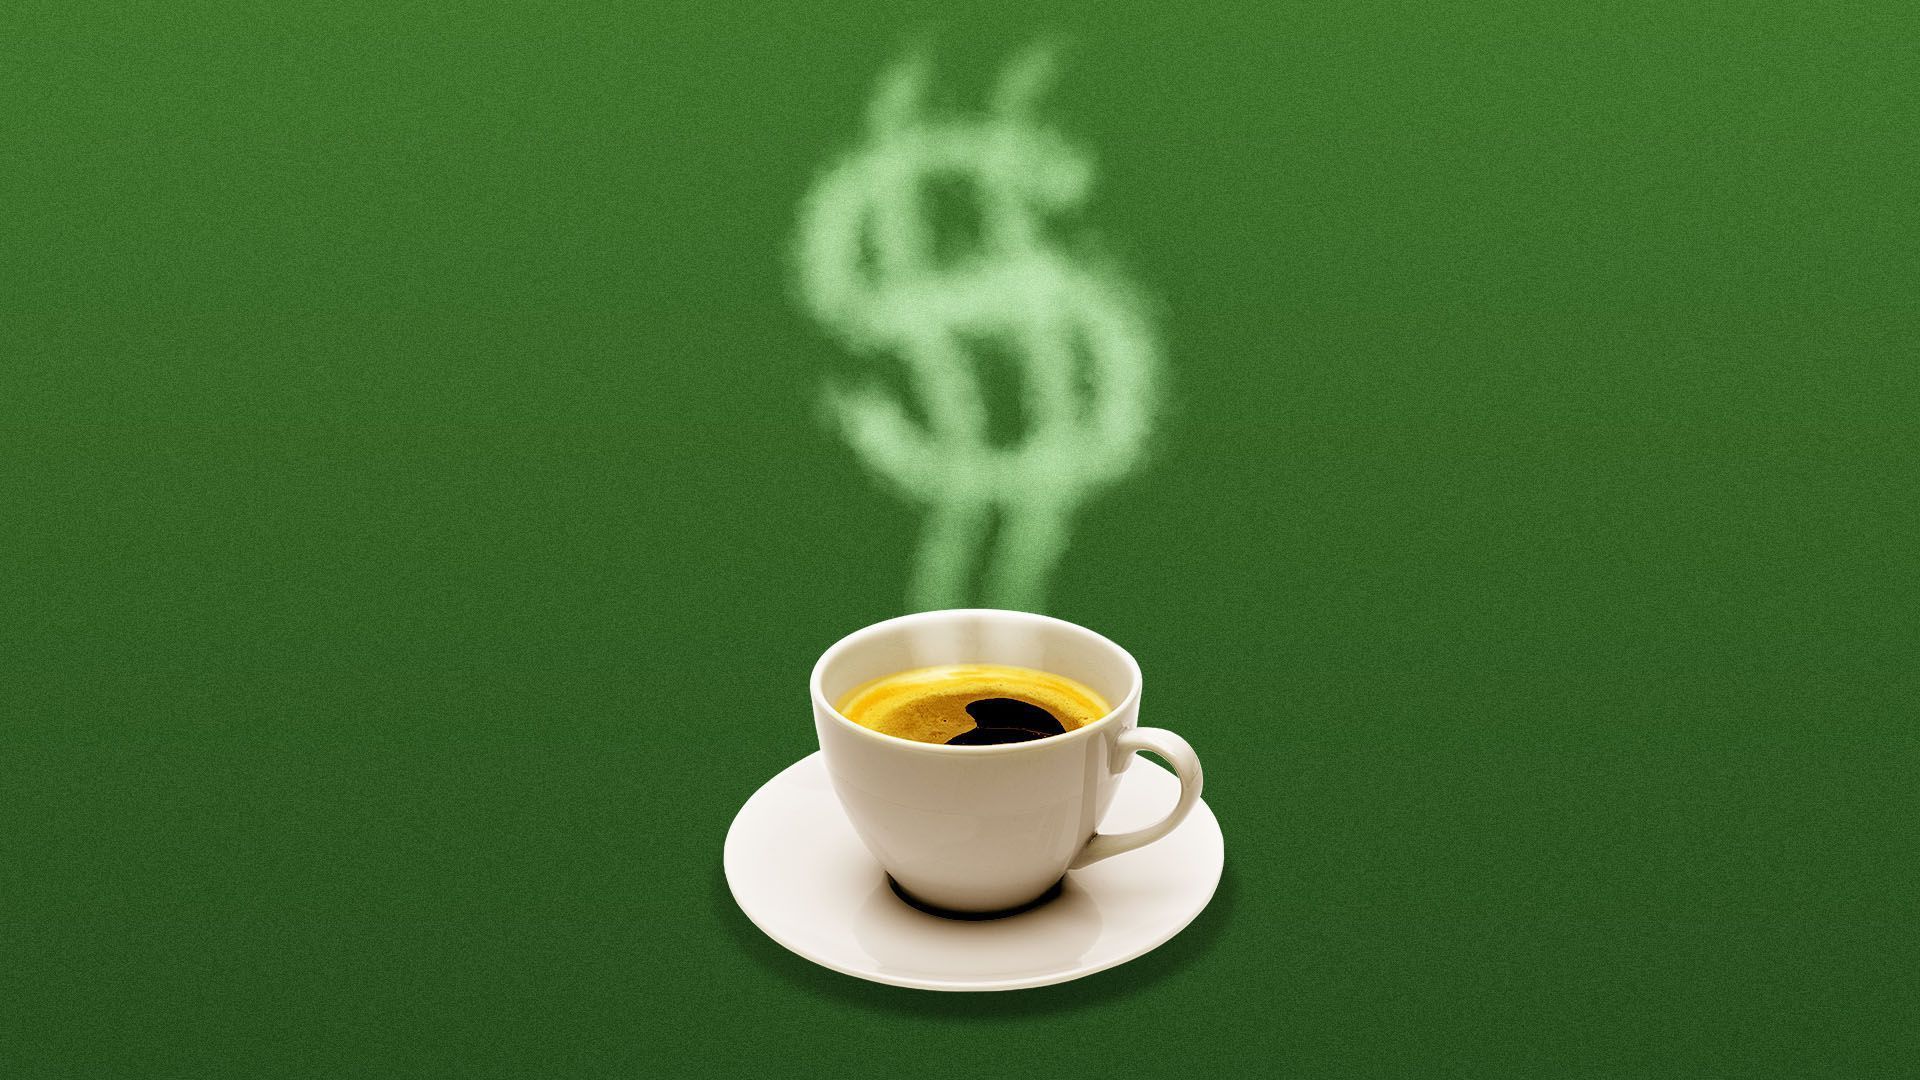 Illustration of a cup of coffee with a dollar sign coming out of it.